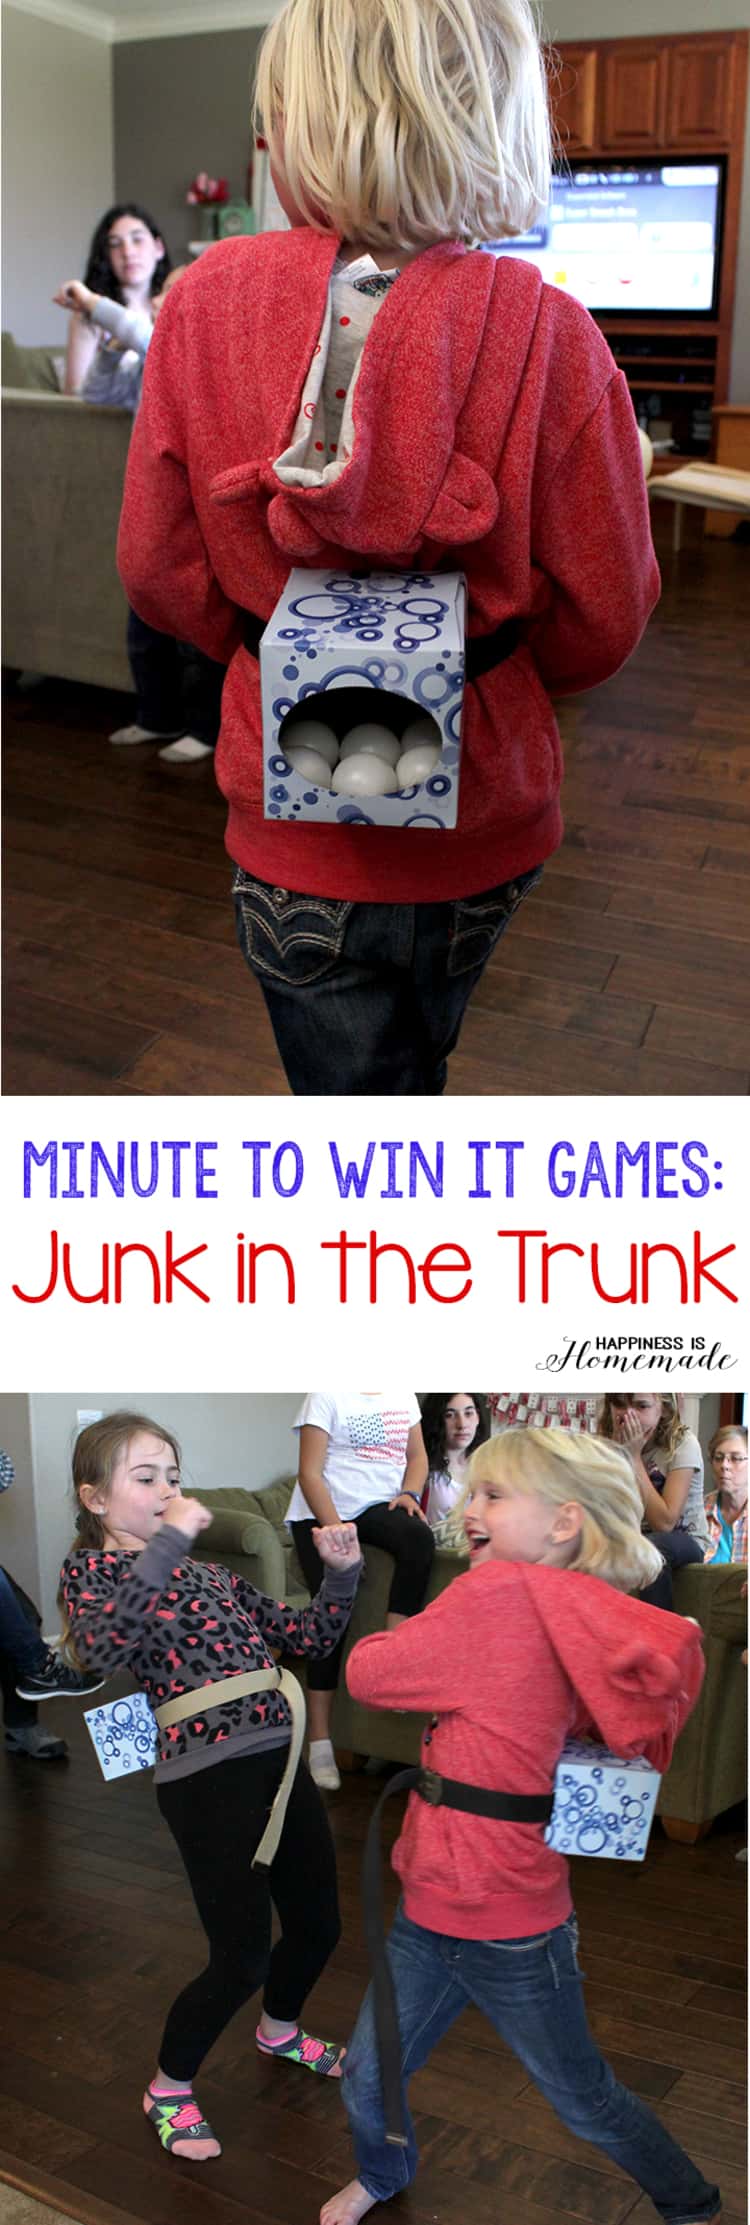 tissue box uses - 2 photo collage of 'Junk In The Trunk' - tissue box filled with ping pong balls and tied at the back of each kid 